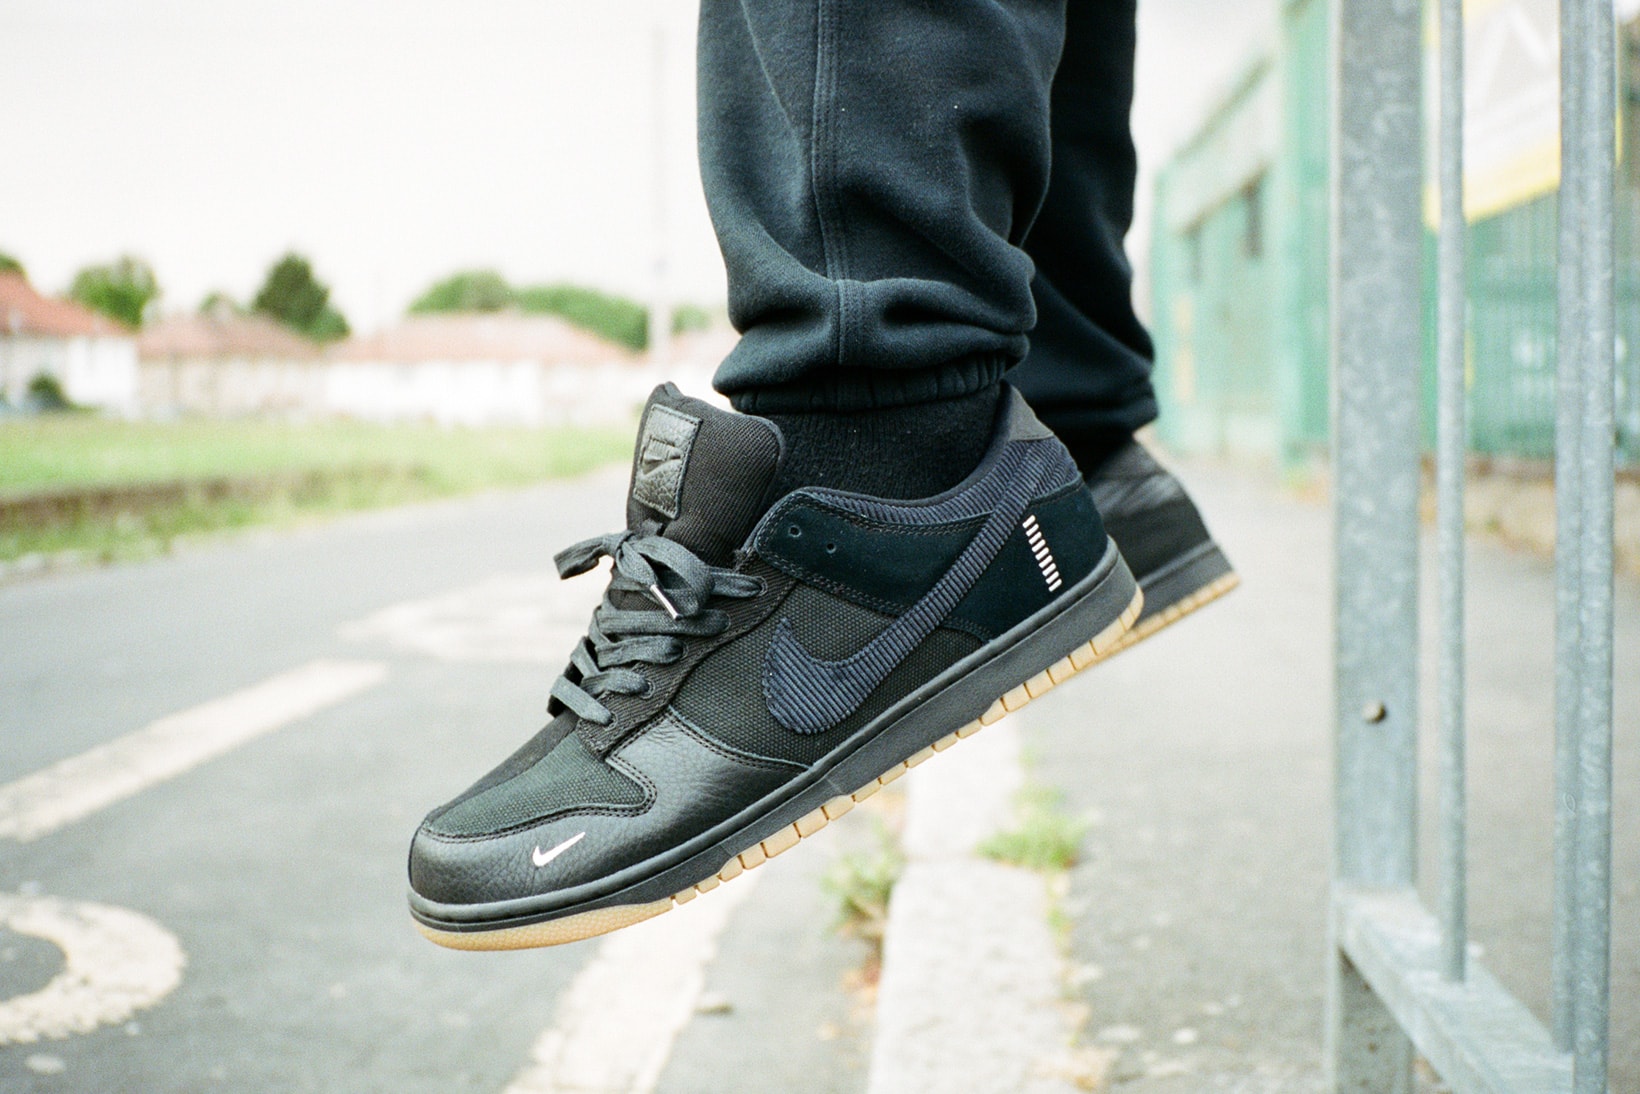 Nike x The Basment Dunk Lows